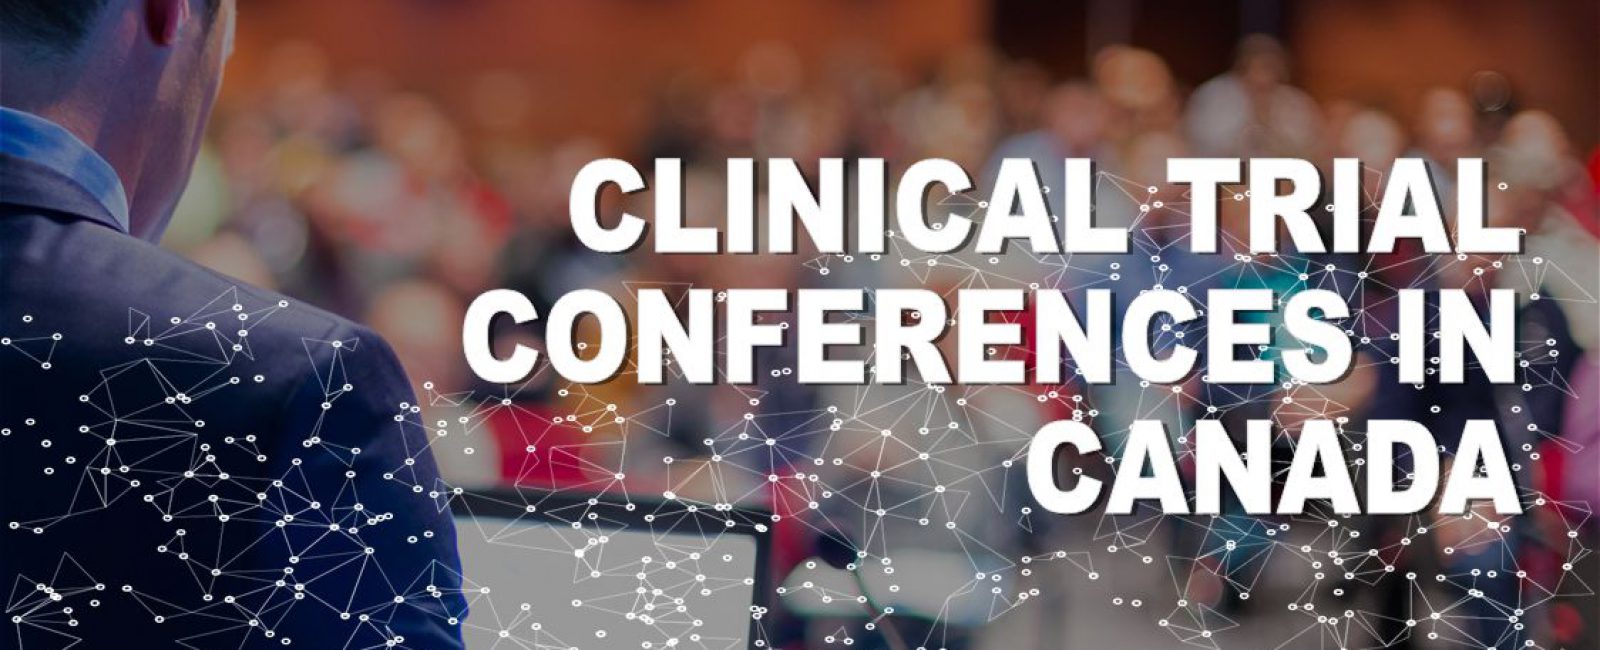 List of Clinical Trial Conferences and Events in Canada